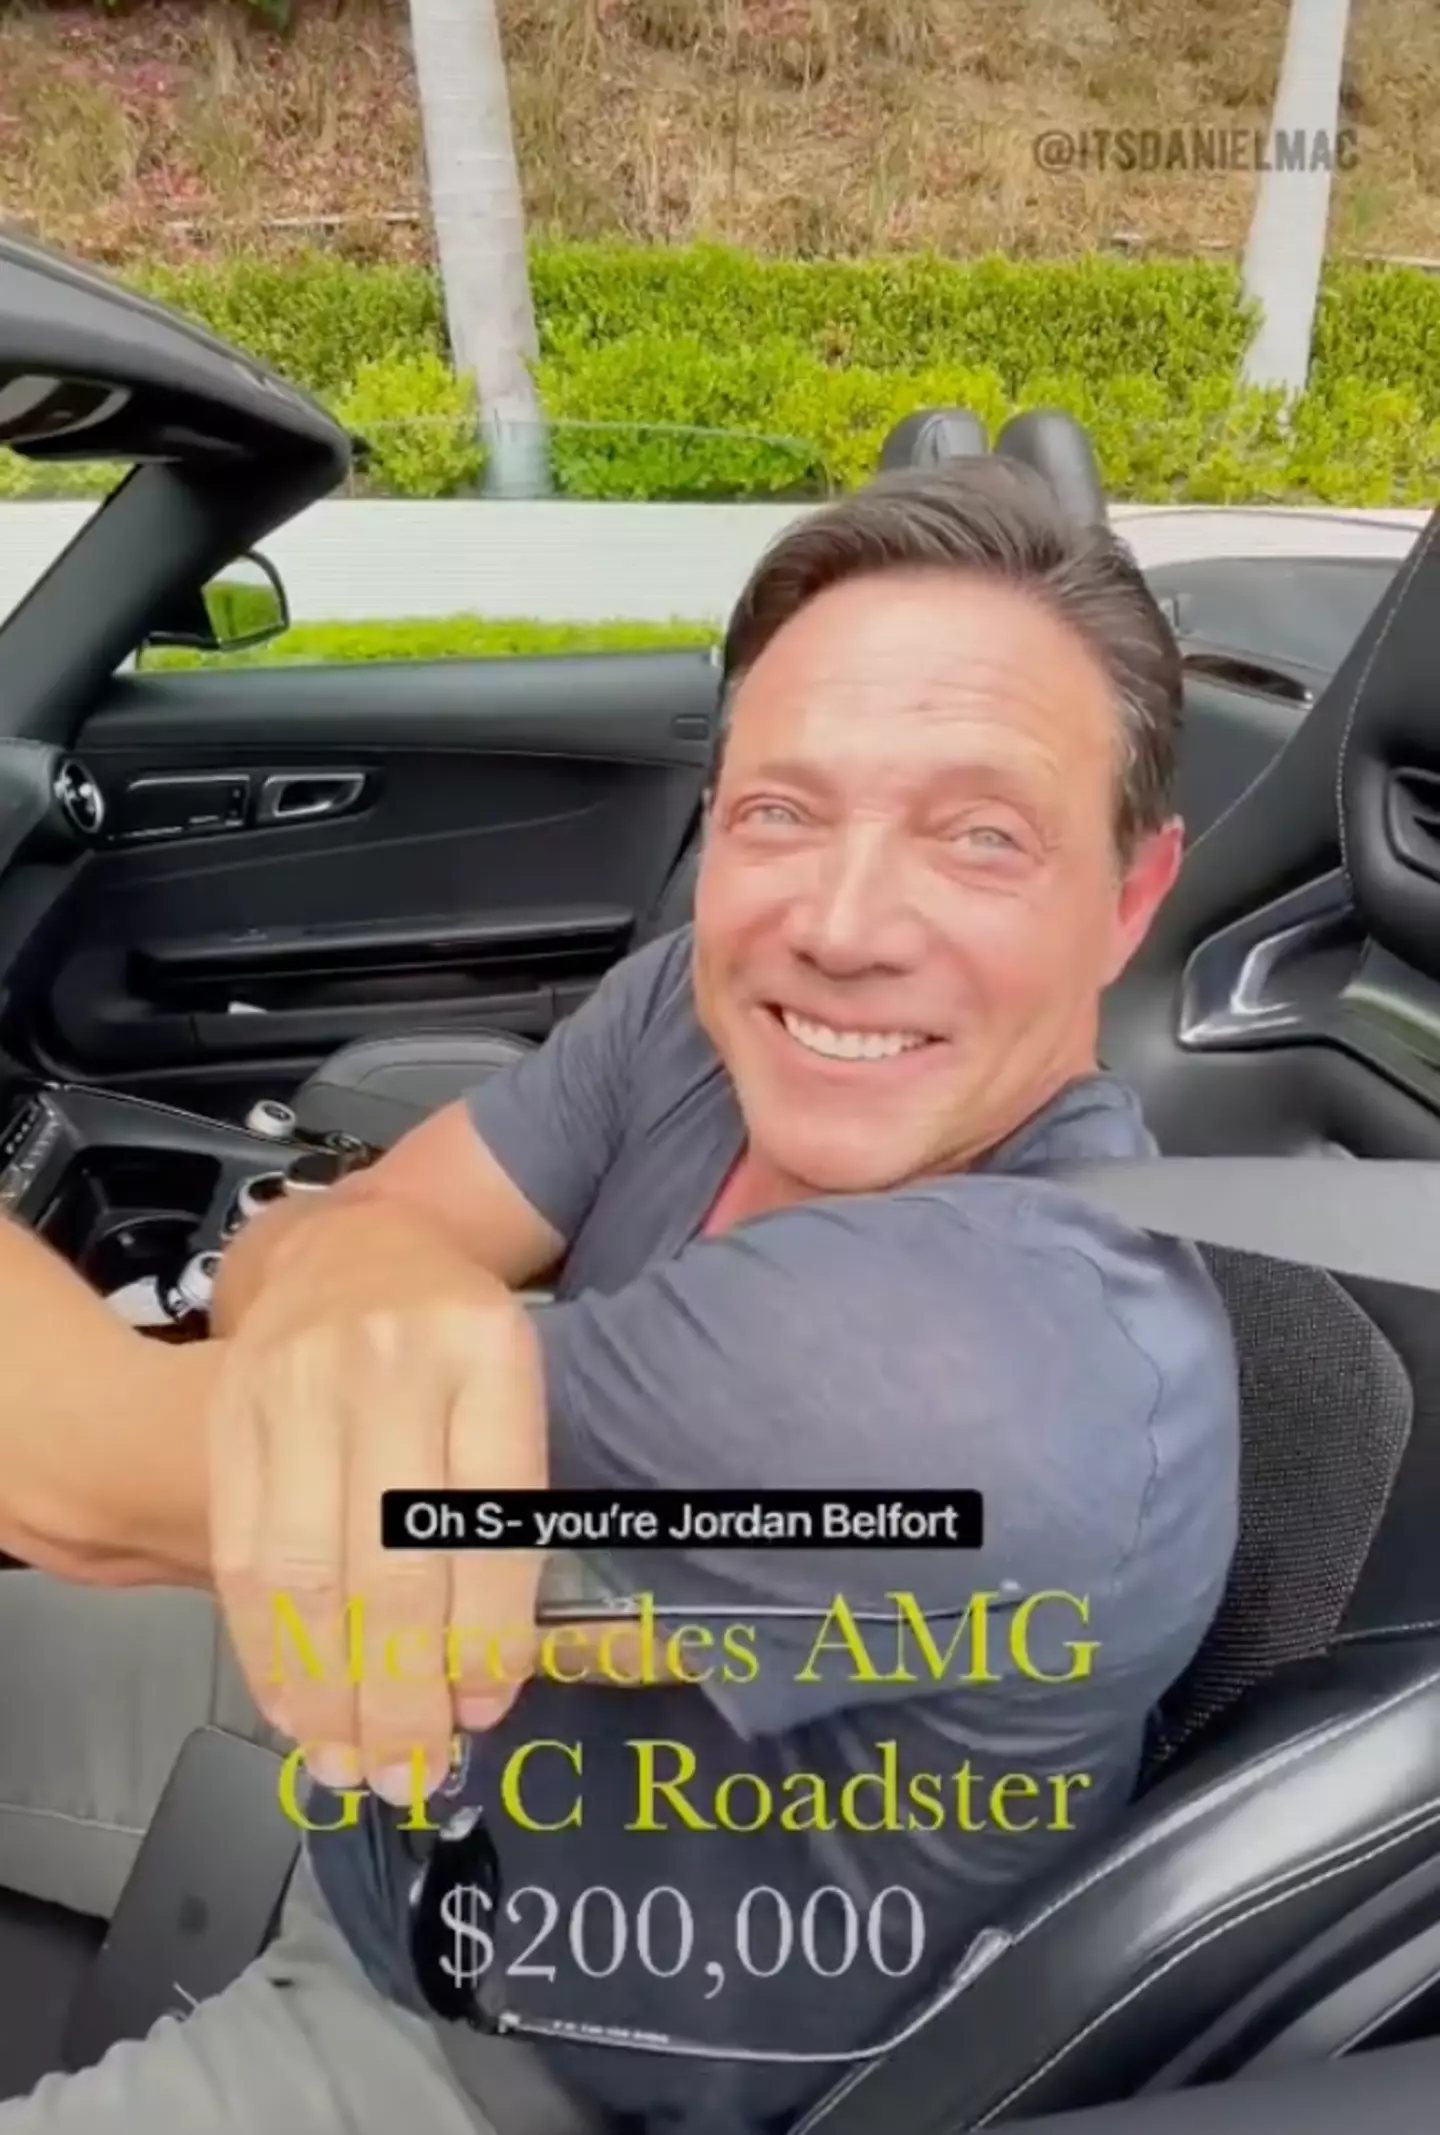 In the clip, Mac heads over to Belfort, who is sitting in his Mercedes-AMG GT C Roadster.